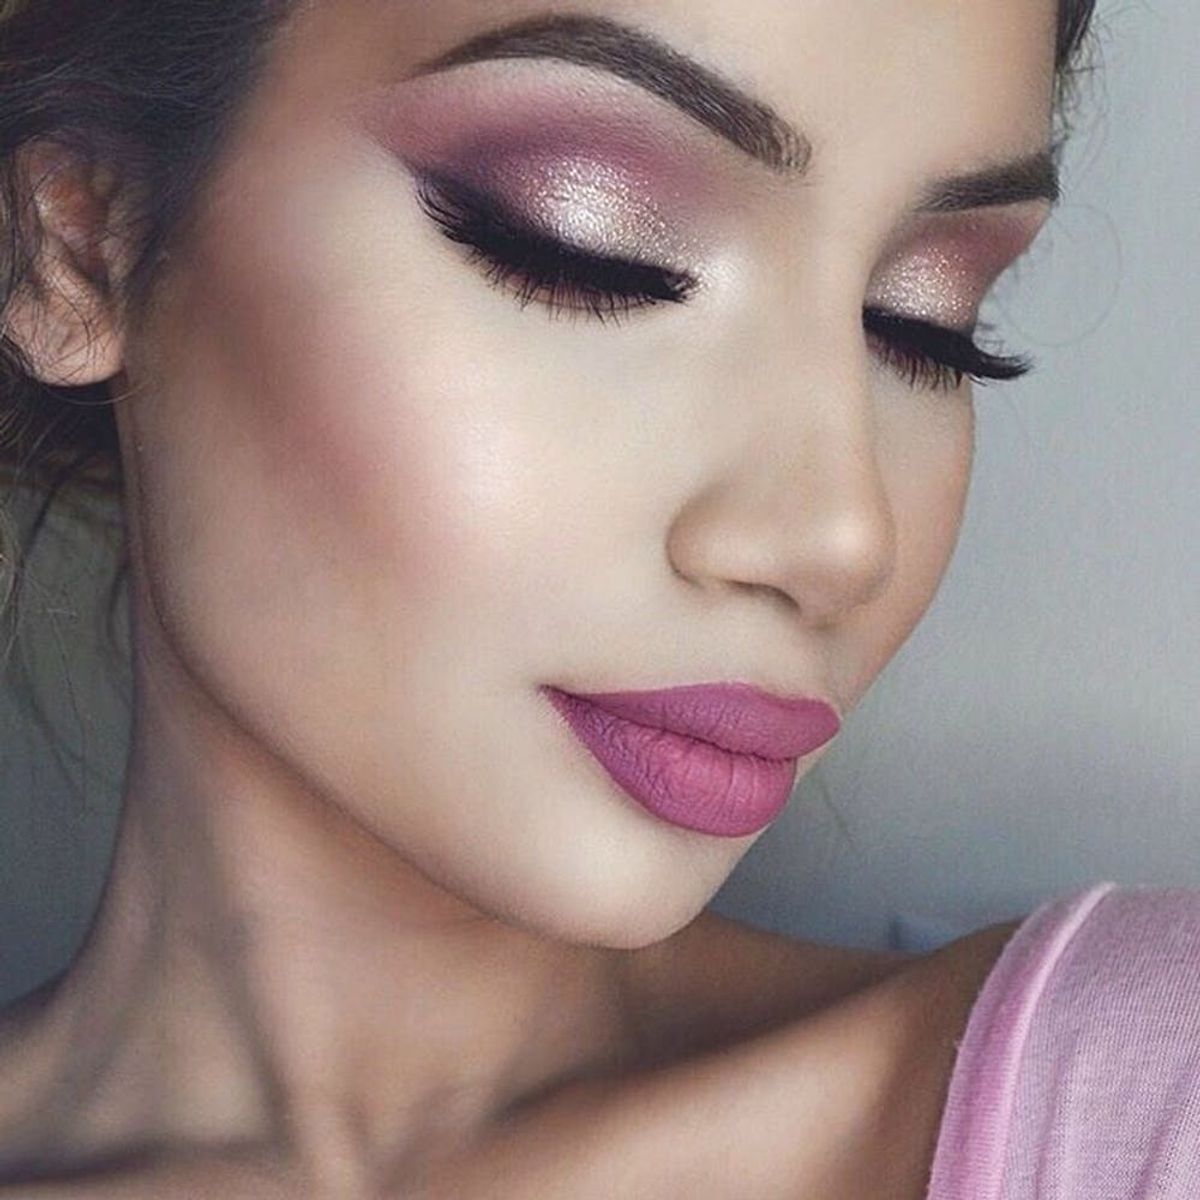 This New Makeup Trend Is the Kind of Pink Eye You’ll Actually Want